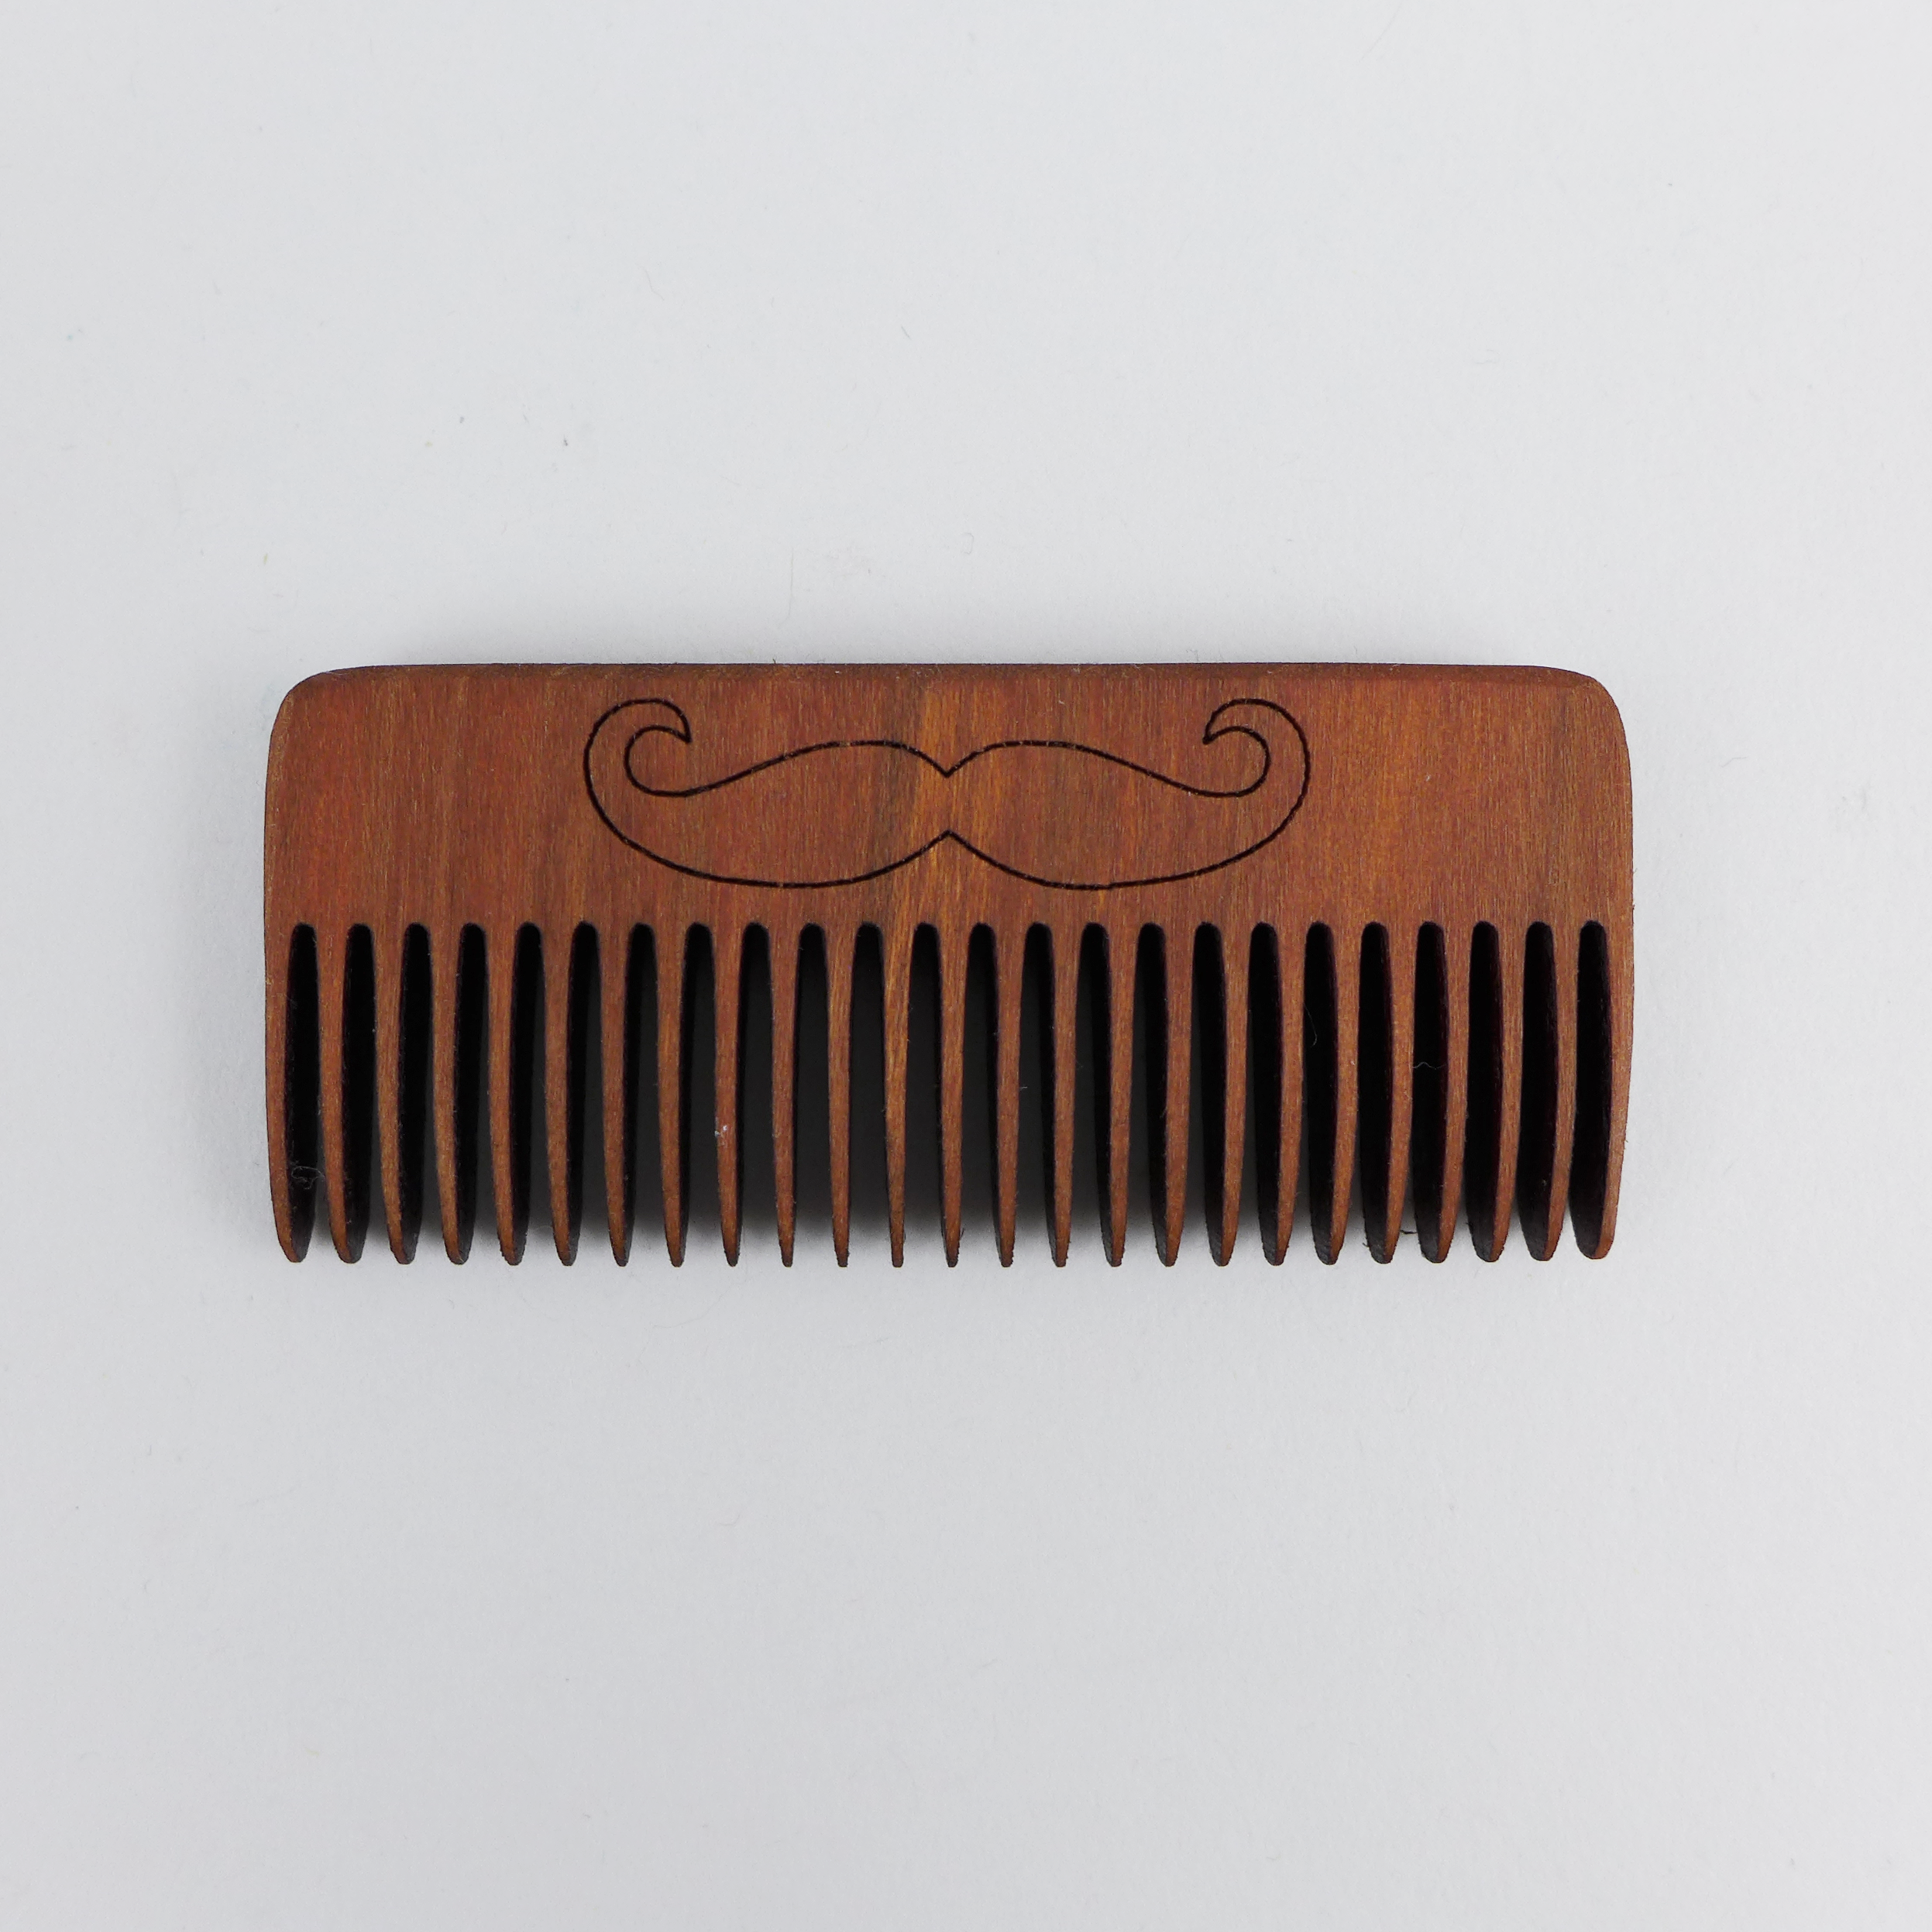 Beard comb is made out of solid cherry wood by Hannah’s Ideas in Wood at the Center for Art in Wood